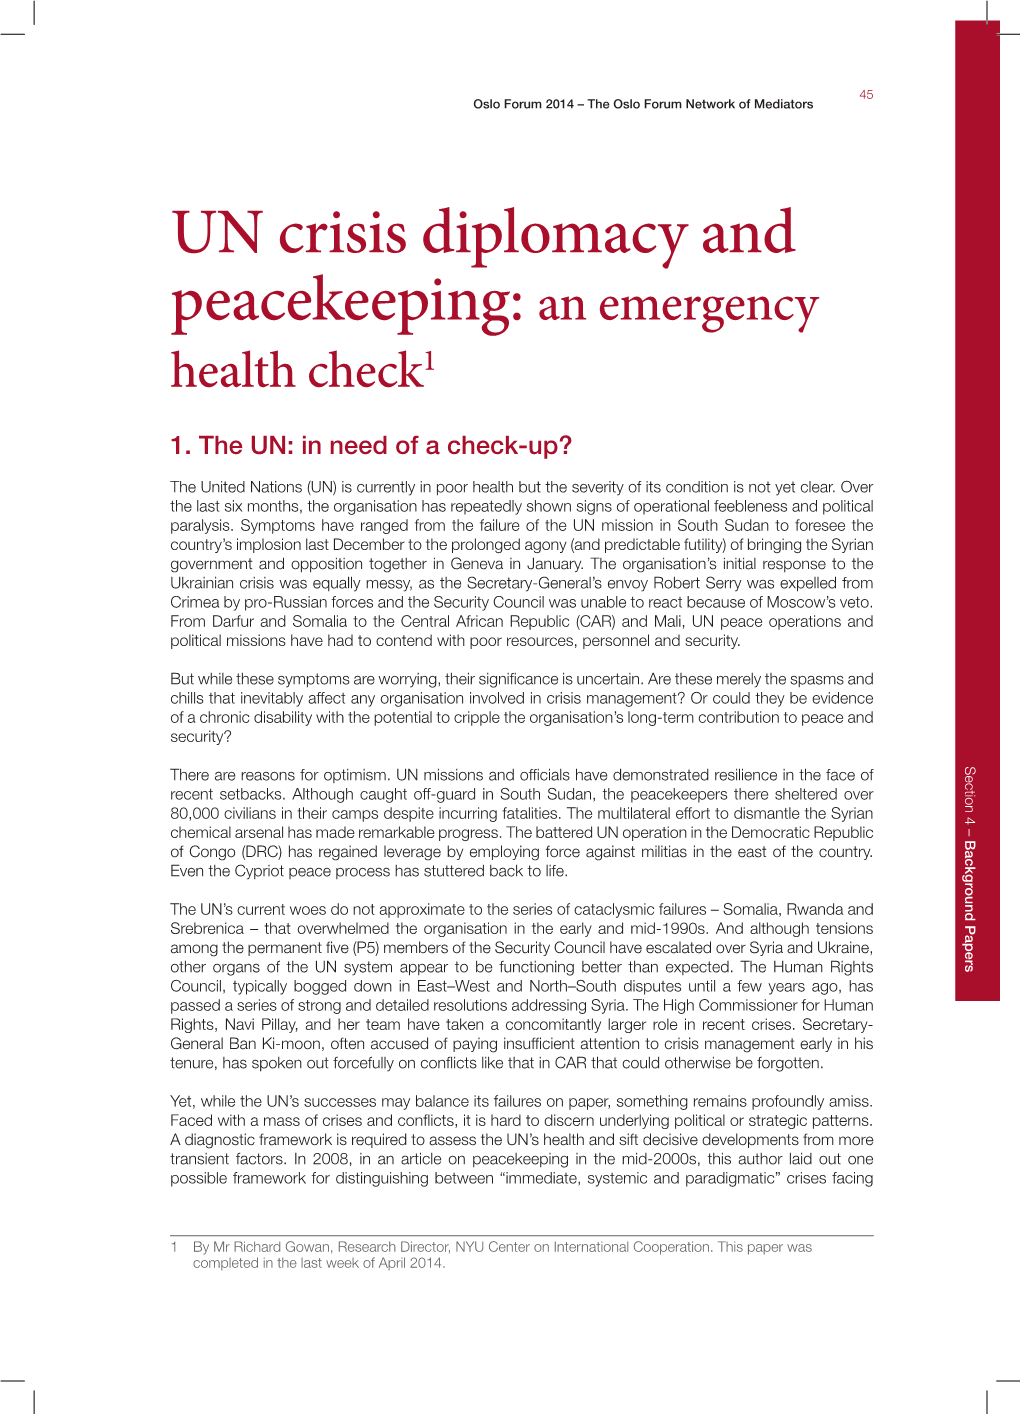 UN Crisis Diplomacy and Peacekeeping: an Emergency Health Check1